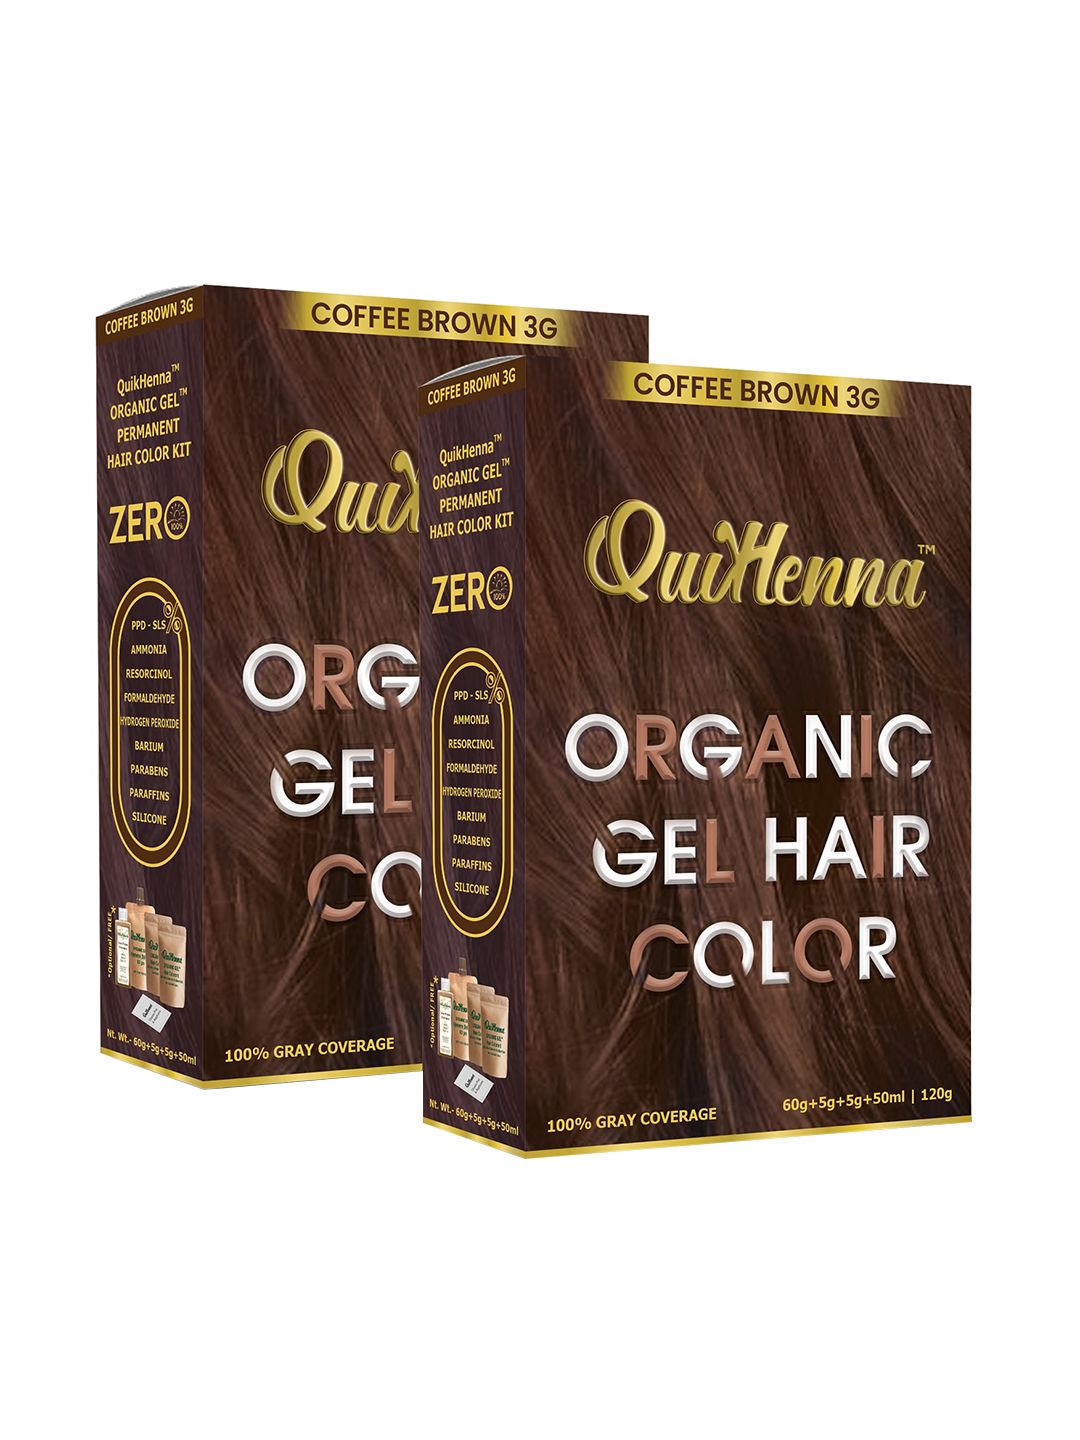 QUIKHENNA Set Of 2 Damage Free Organic Gel Hair Color Coffee Brown 3G - 120 g Each Price in India